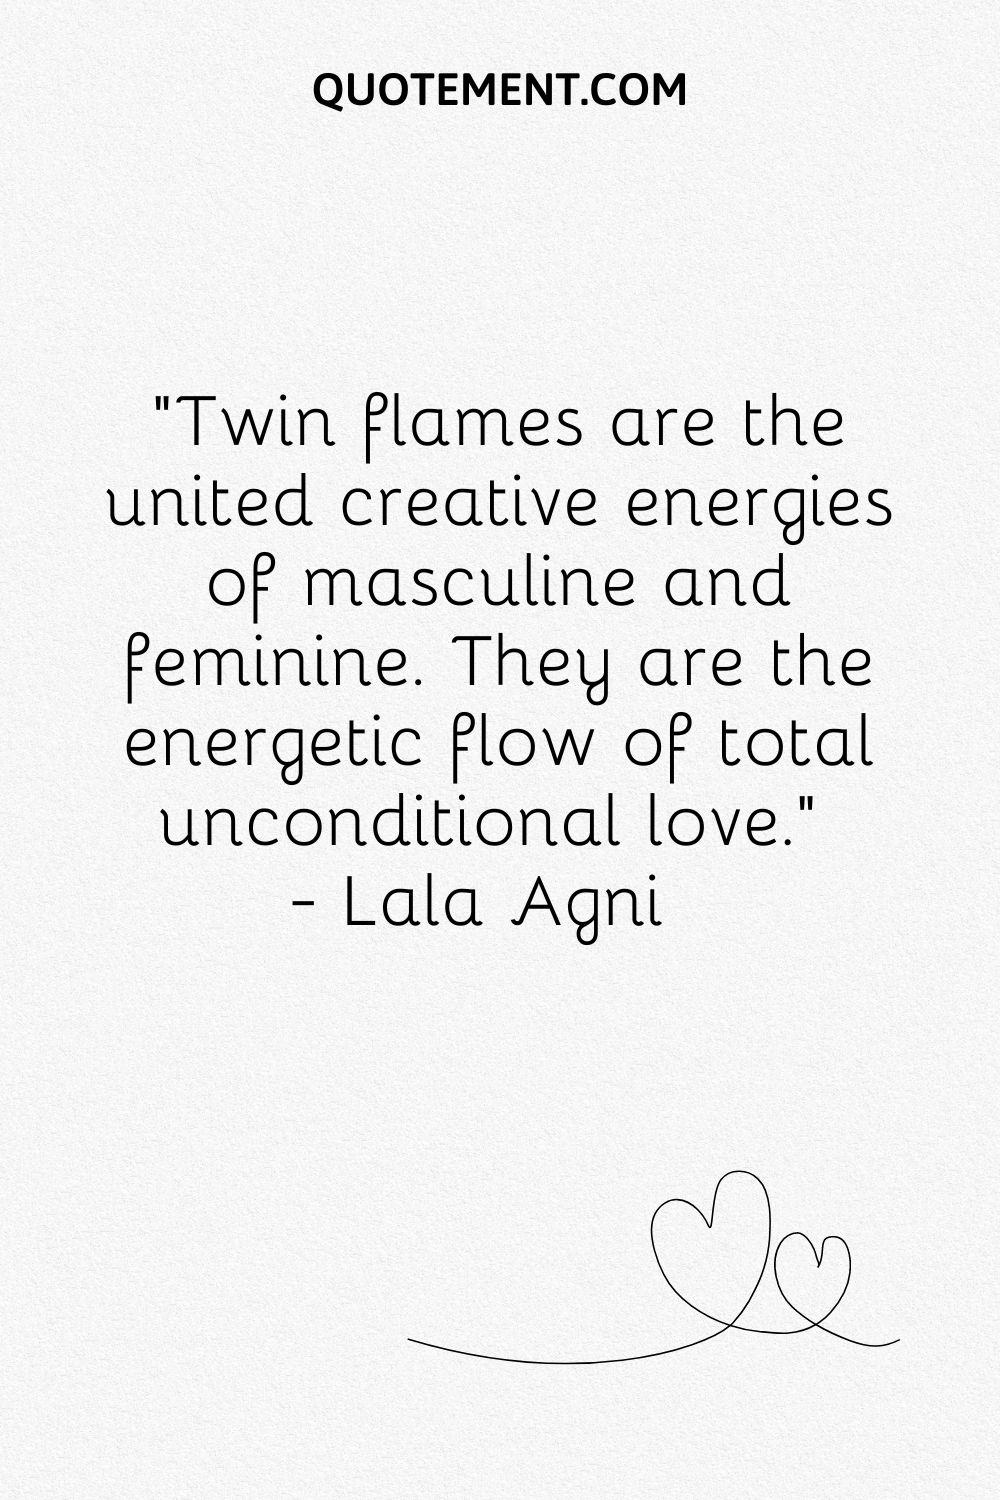 Twin flames are the united creative energies of masculine and feminine